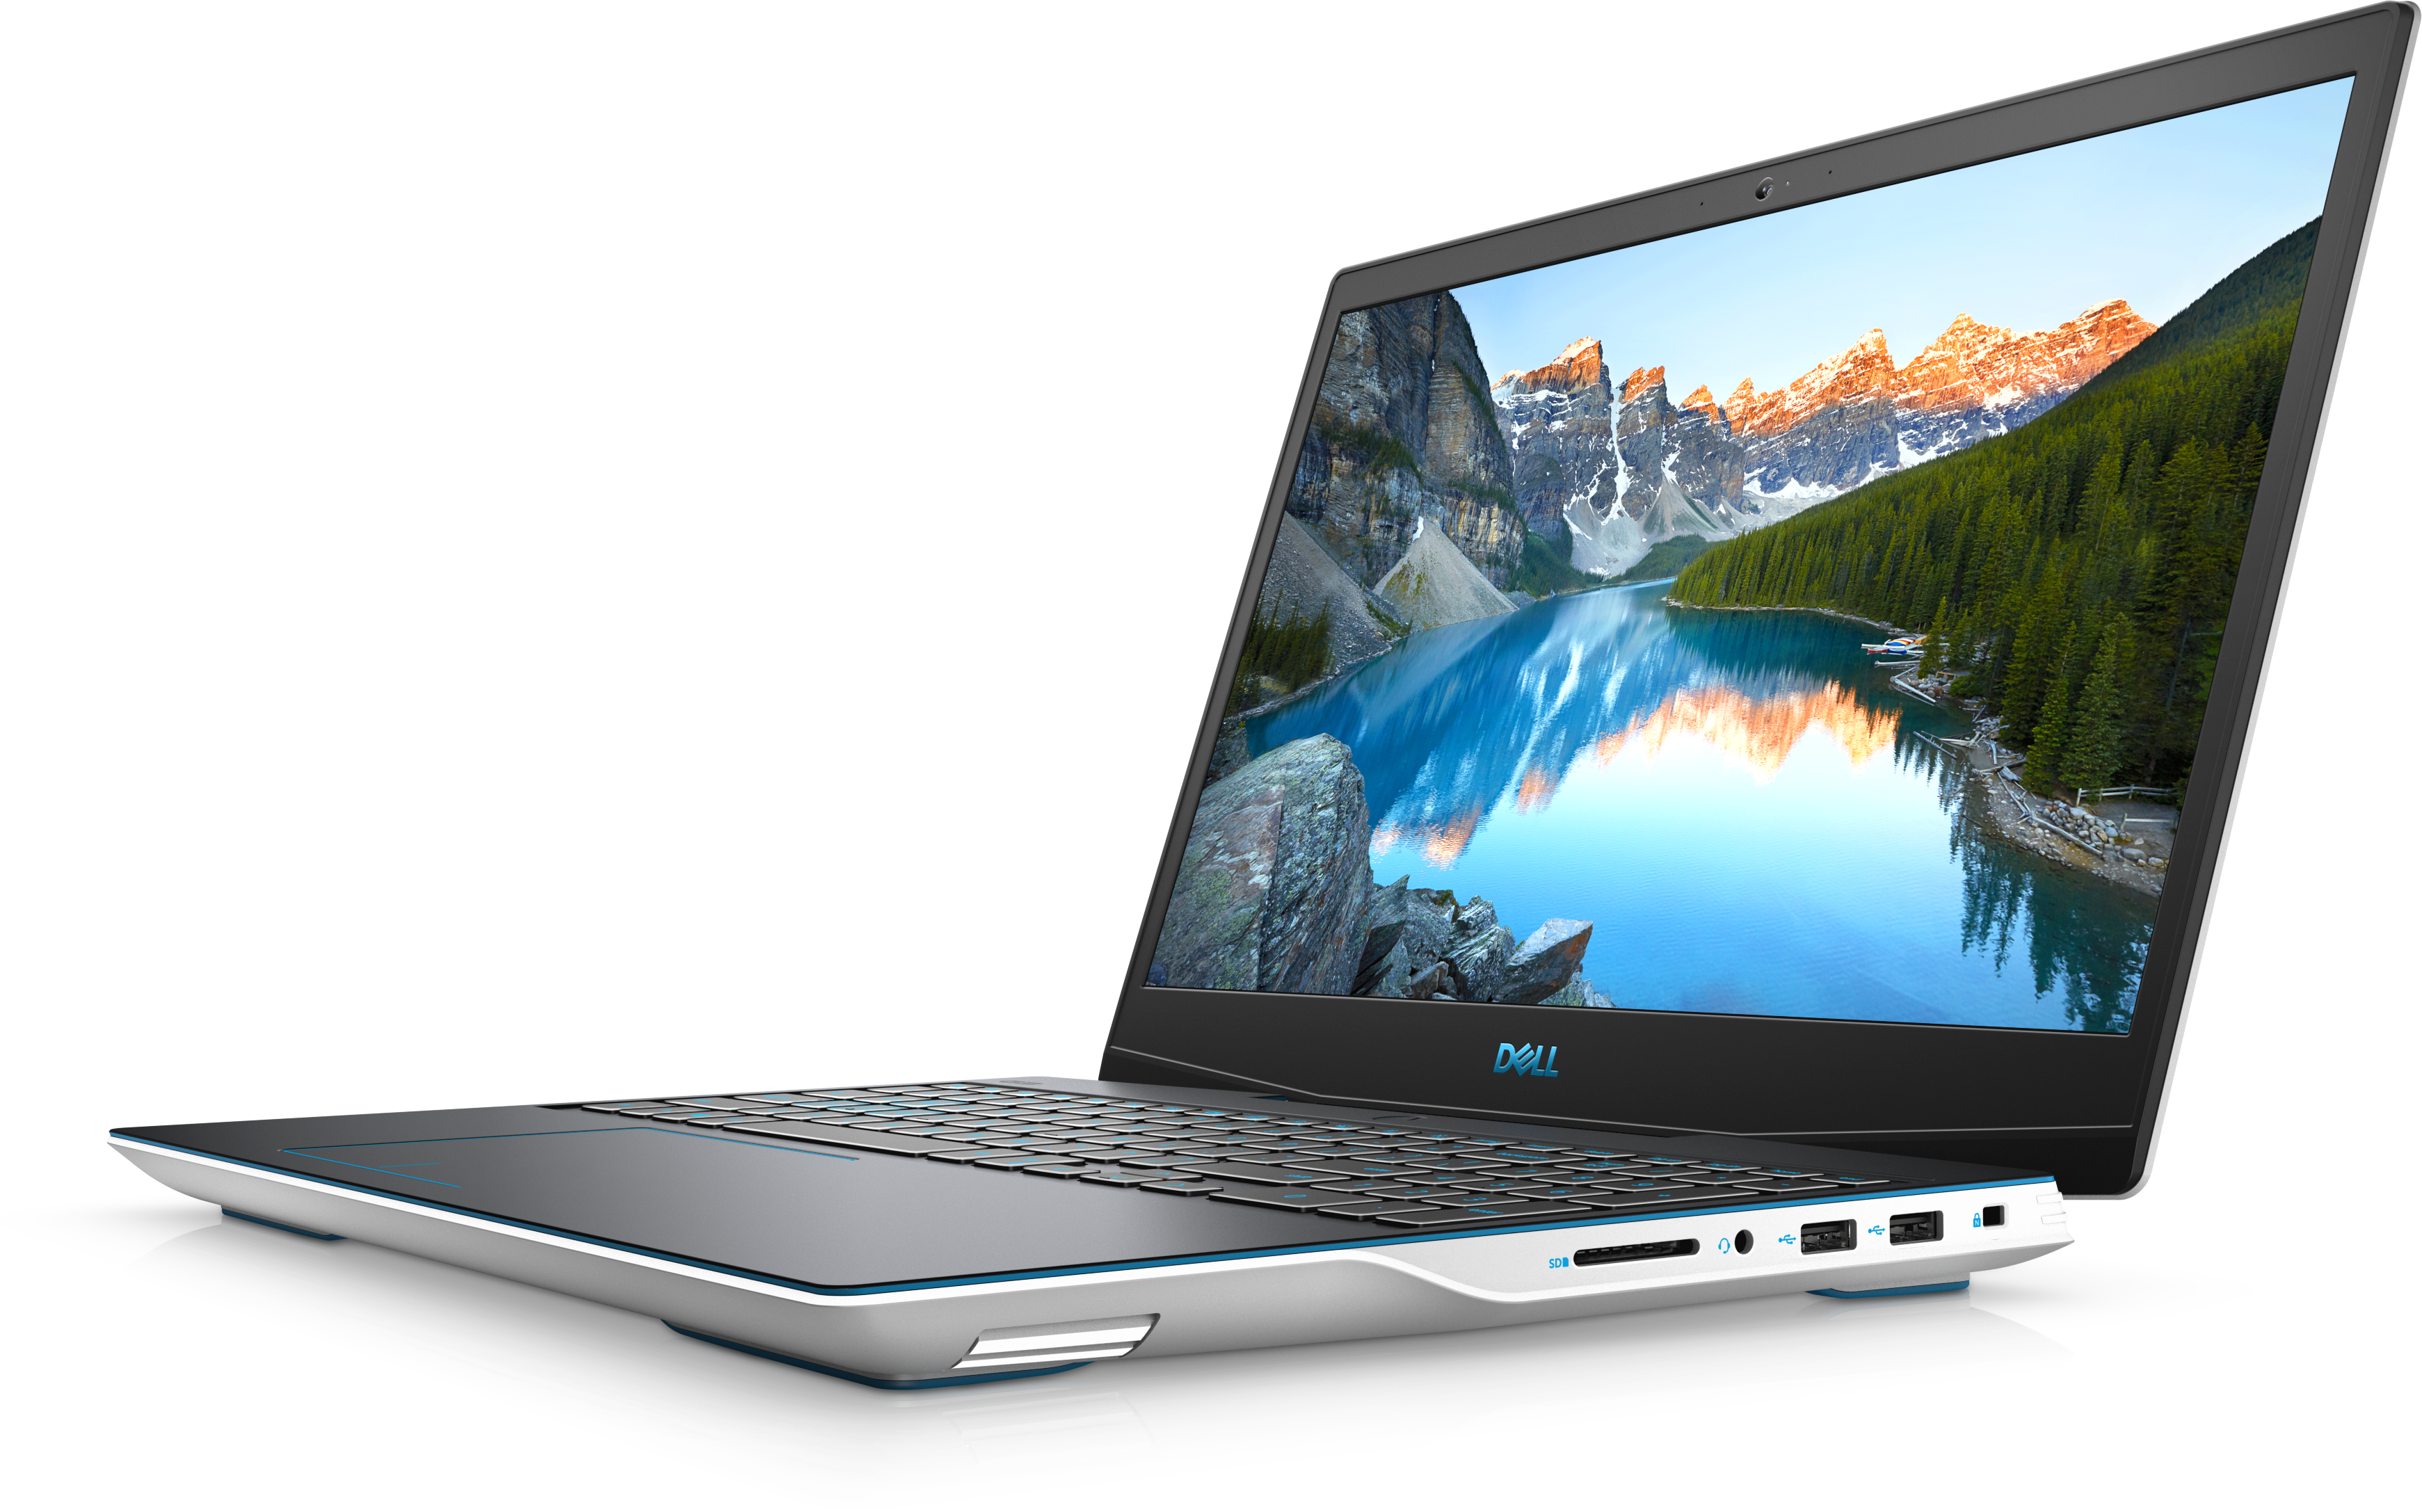 Dell G3 15 Inch Gaming Laptop with Game Shift technology | Dell USA